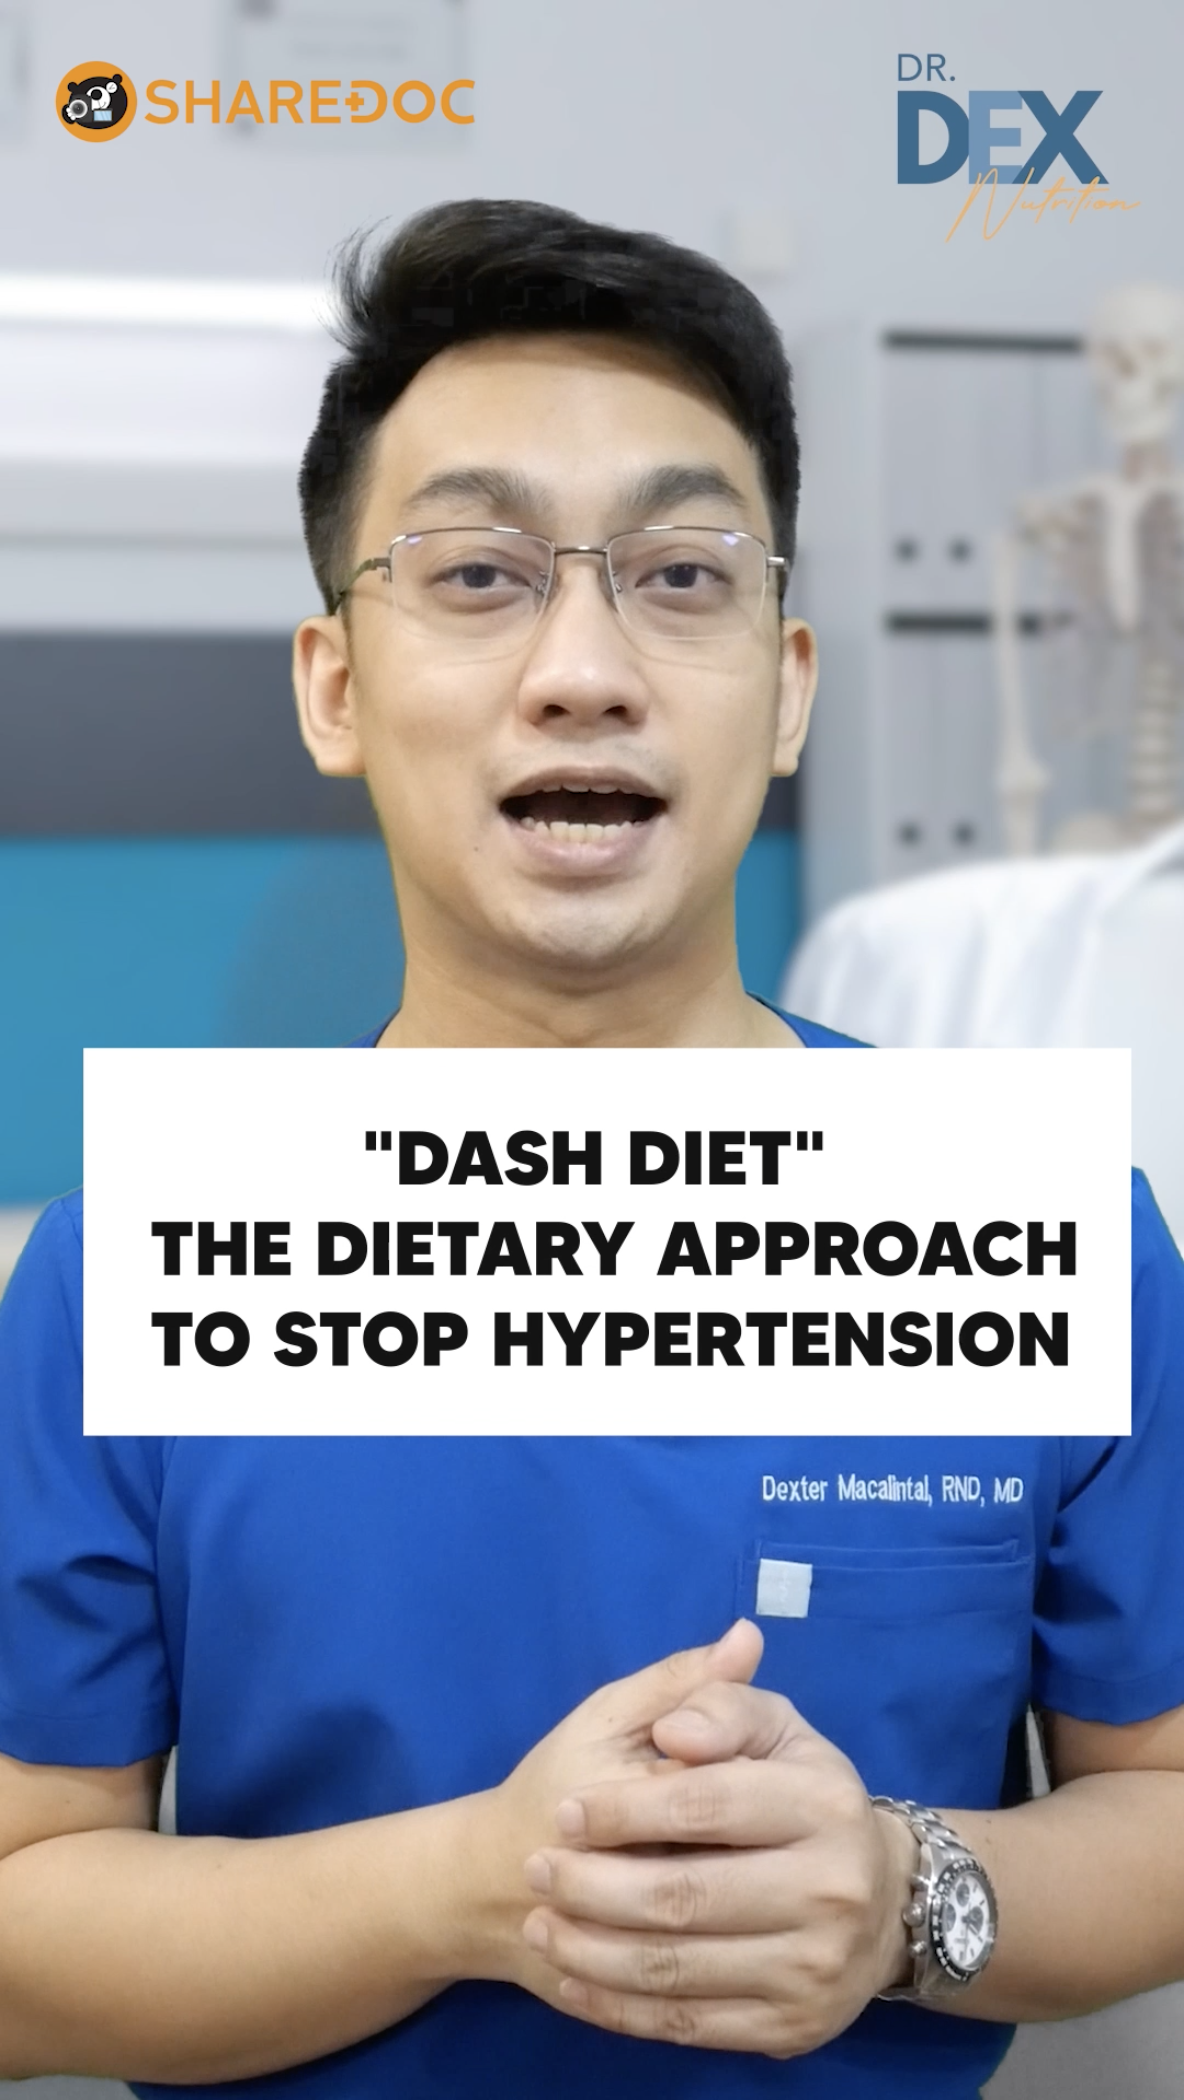 Dietary approach to stop hypertension